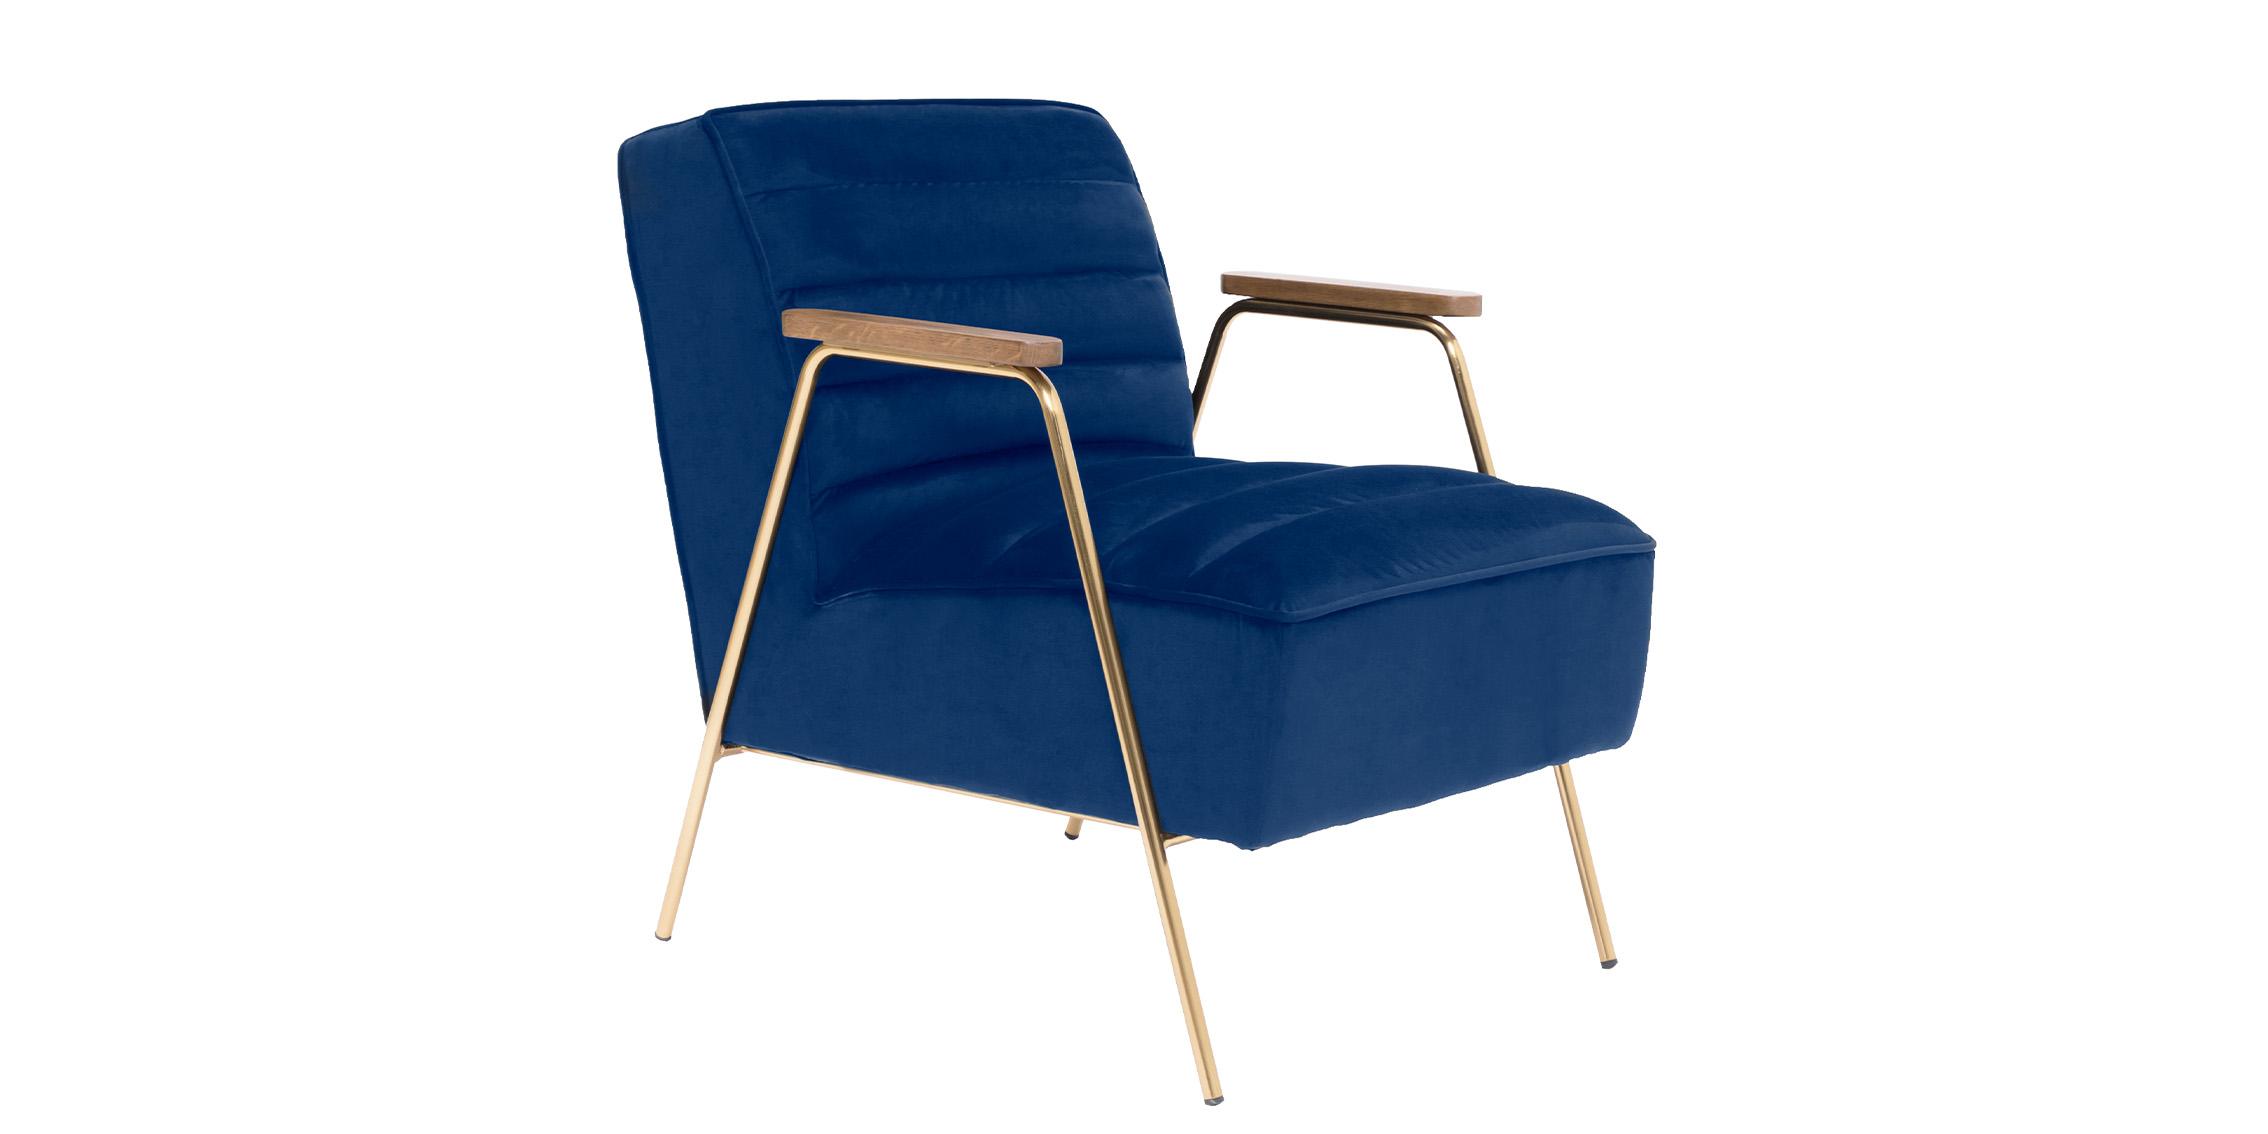 Contemporary, Modern Accent Chair WOODFORD 521Navy 521Navy in Navy, Gold Fabric